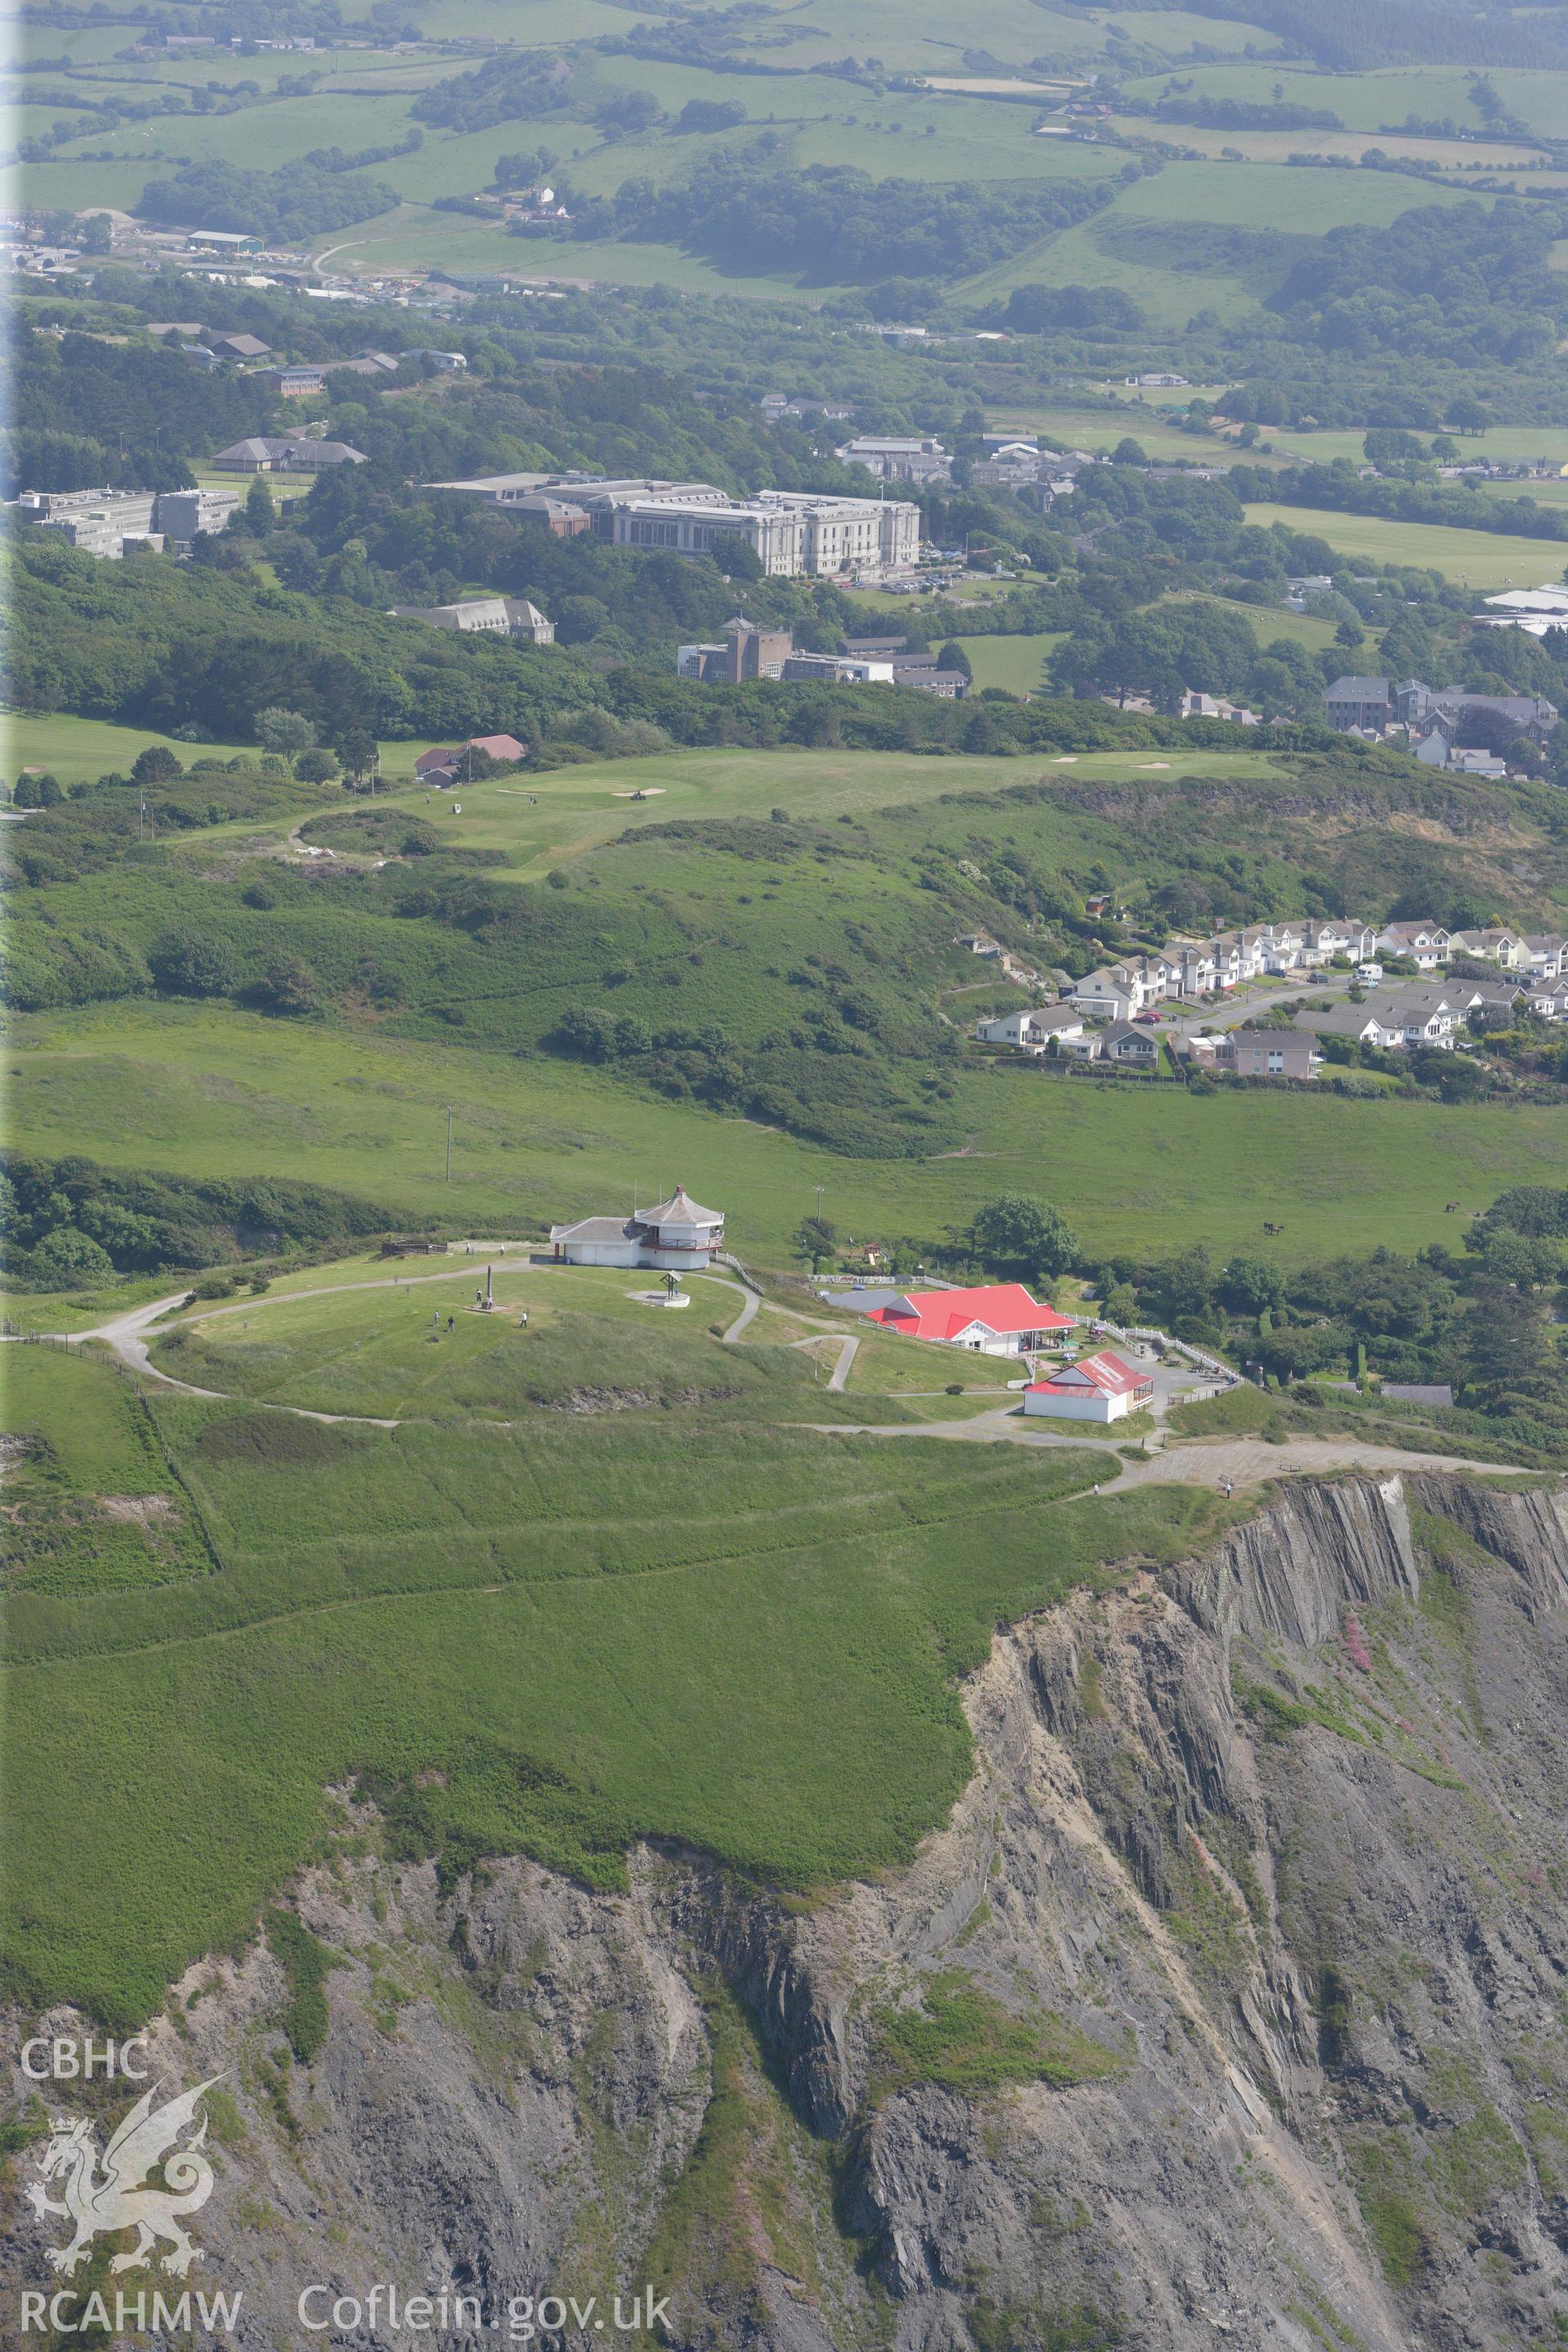 RCAHMW colour oblique aerial photograph of Aberystwyth. Taken on 16 June 2009 by Toby Driver